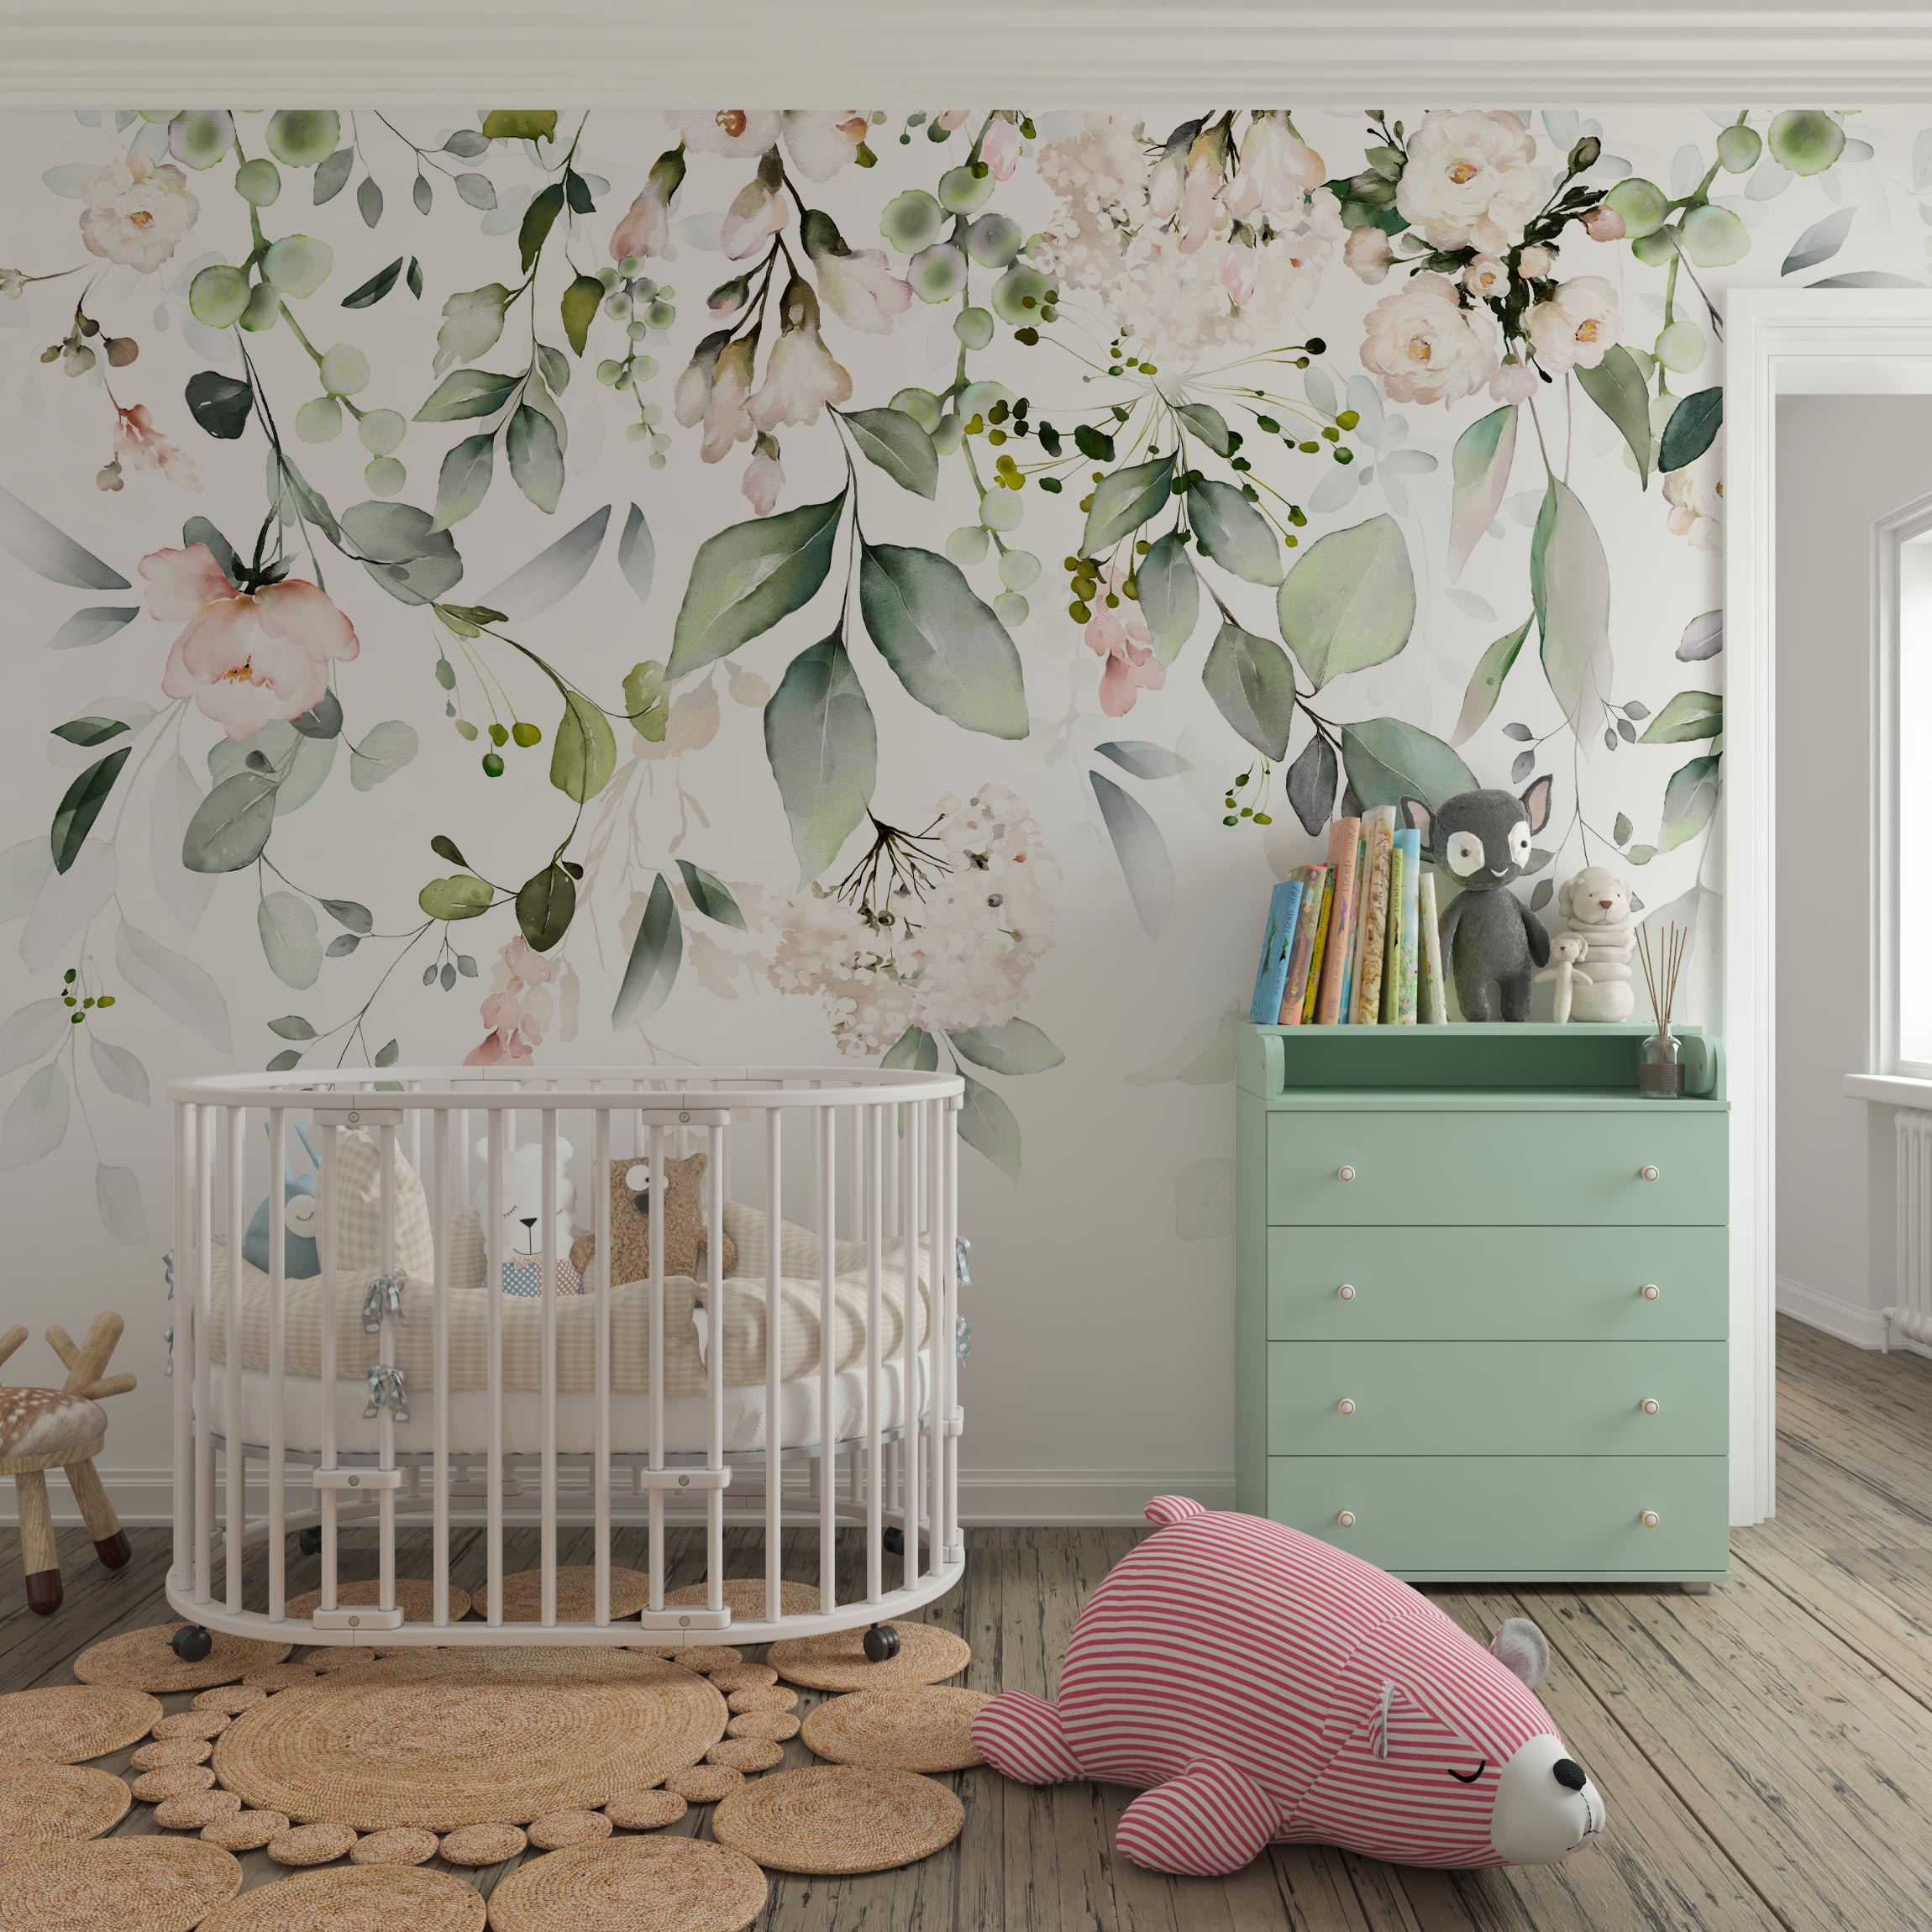 Nursery with Sage Green Chest of Drawers and White Round Crib:  Sage green peel and stick wallpaper seamlessly complements sage green chest of drawers and white round crib in nursery.